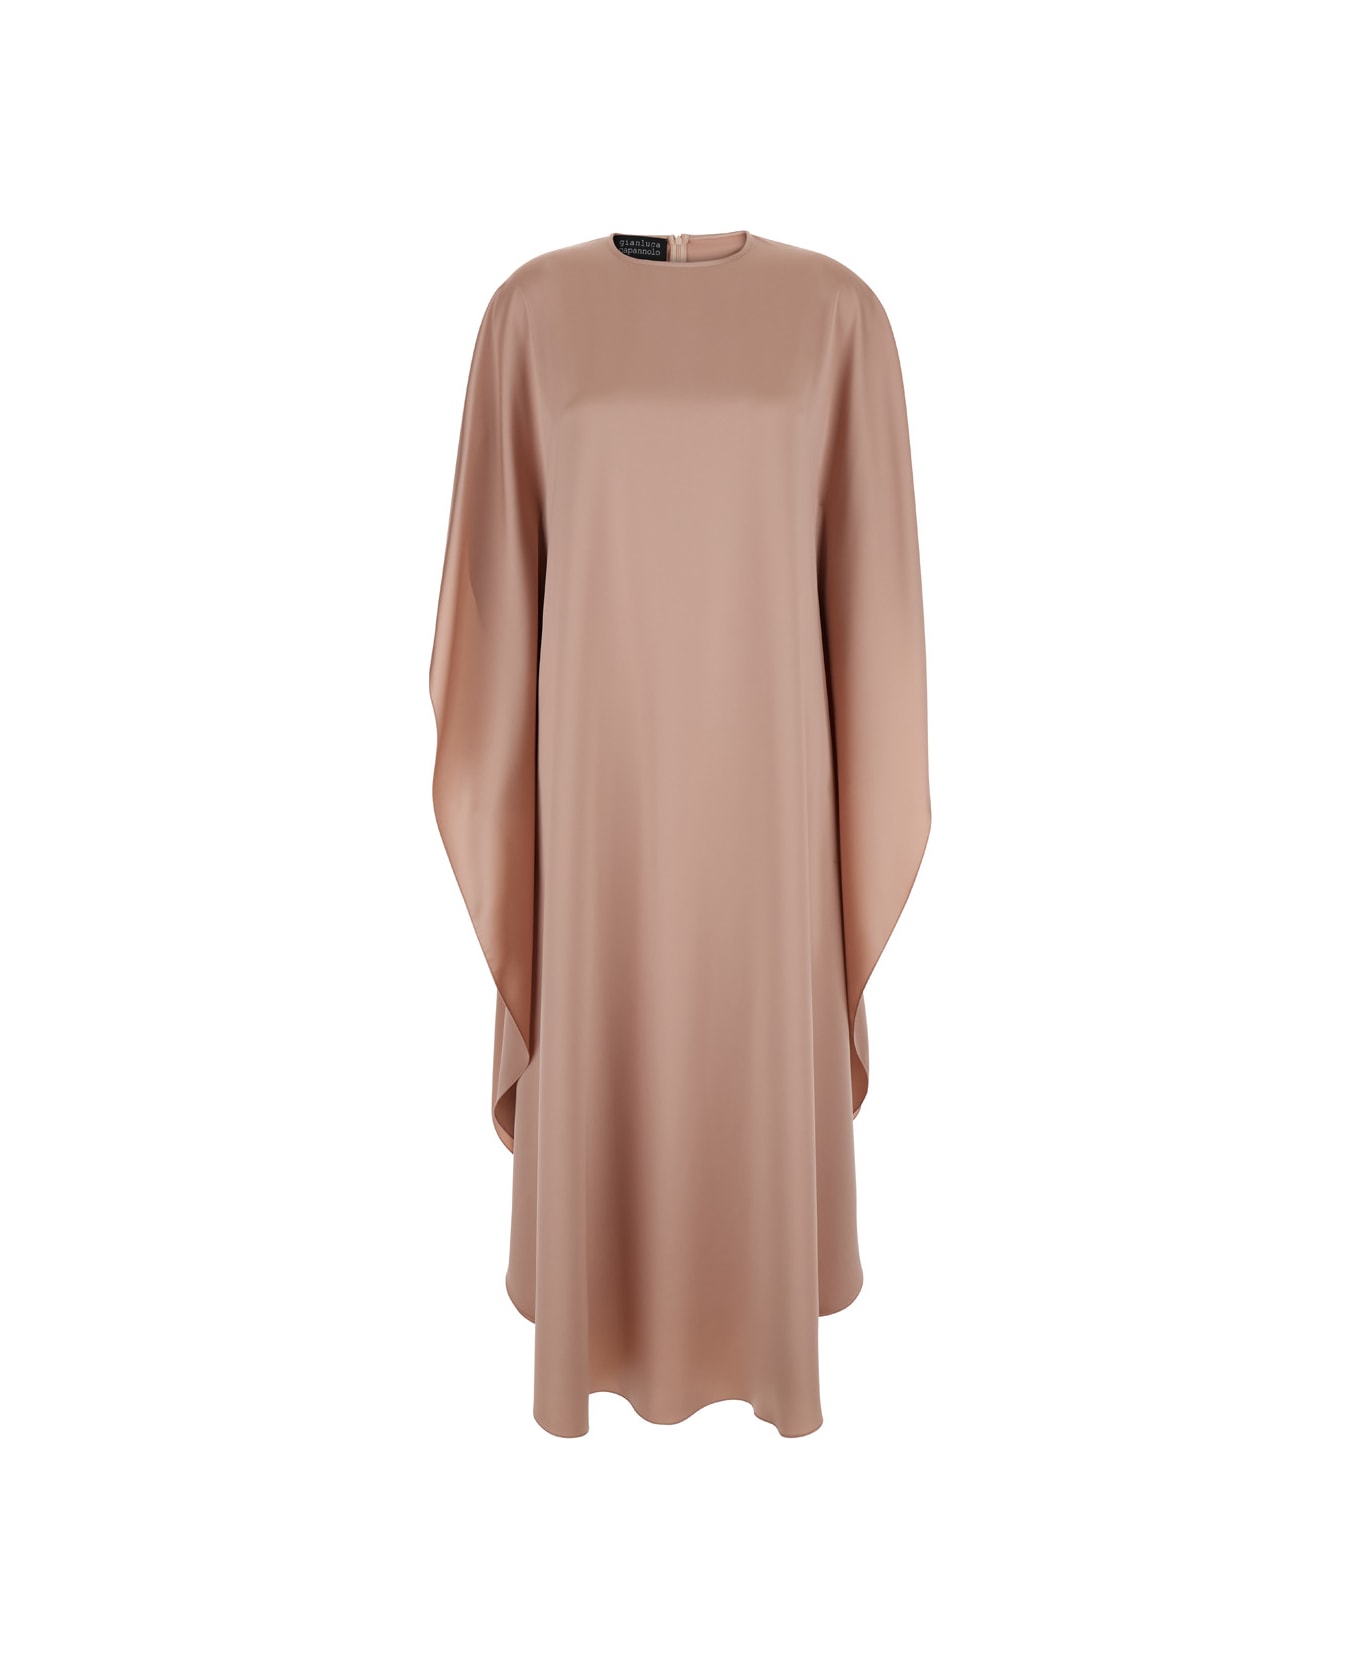 Gianluca Capannolo Pink Long Dress With Boat Neck In Silk Woman - Beige ワンピース＆ドレス